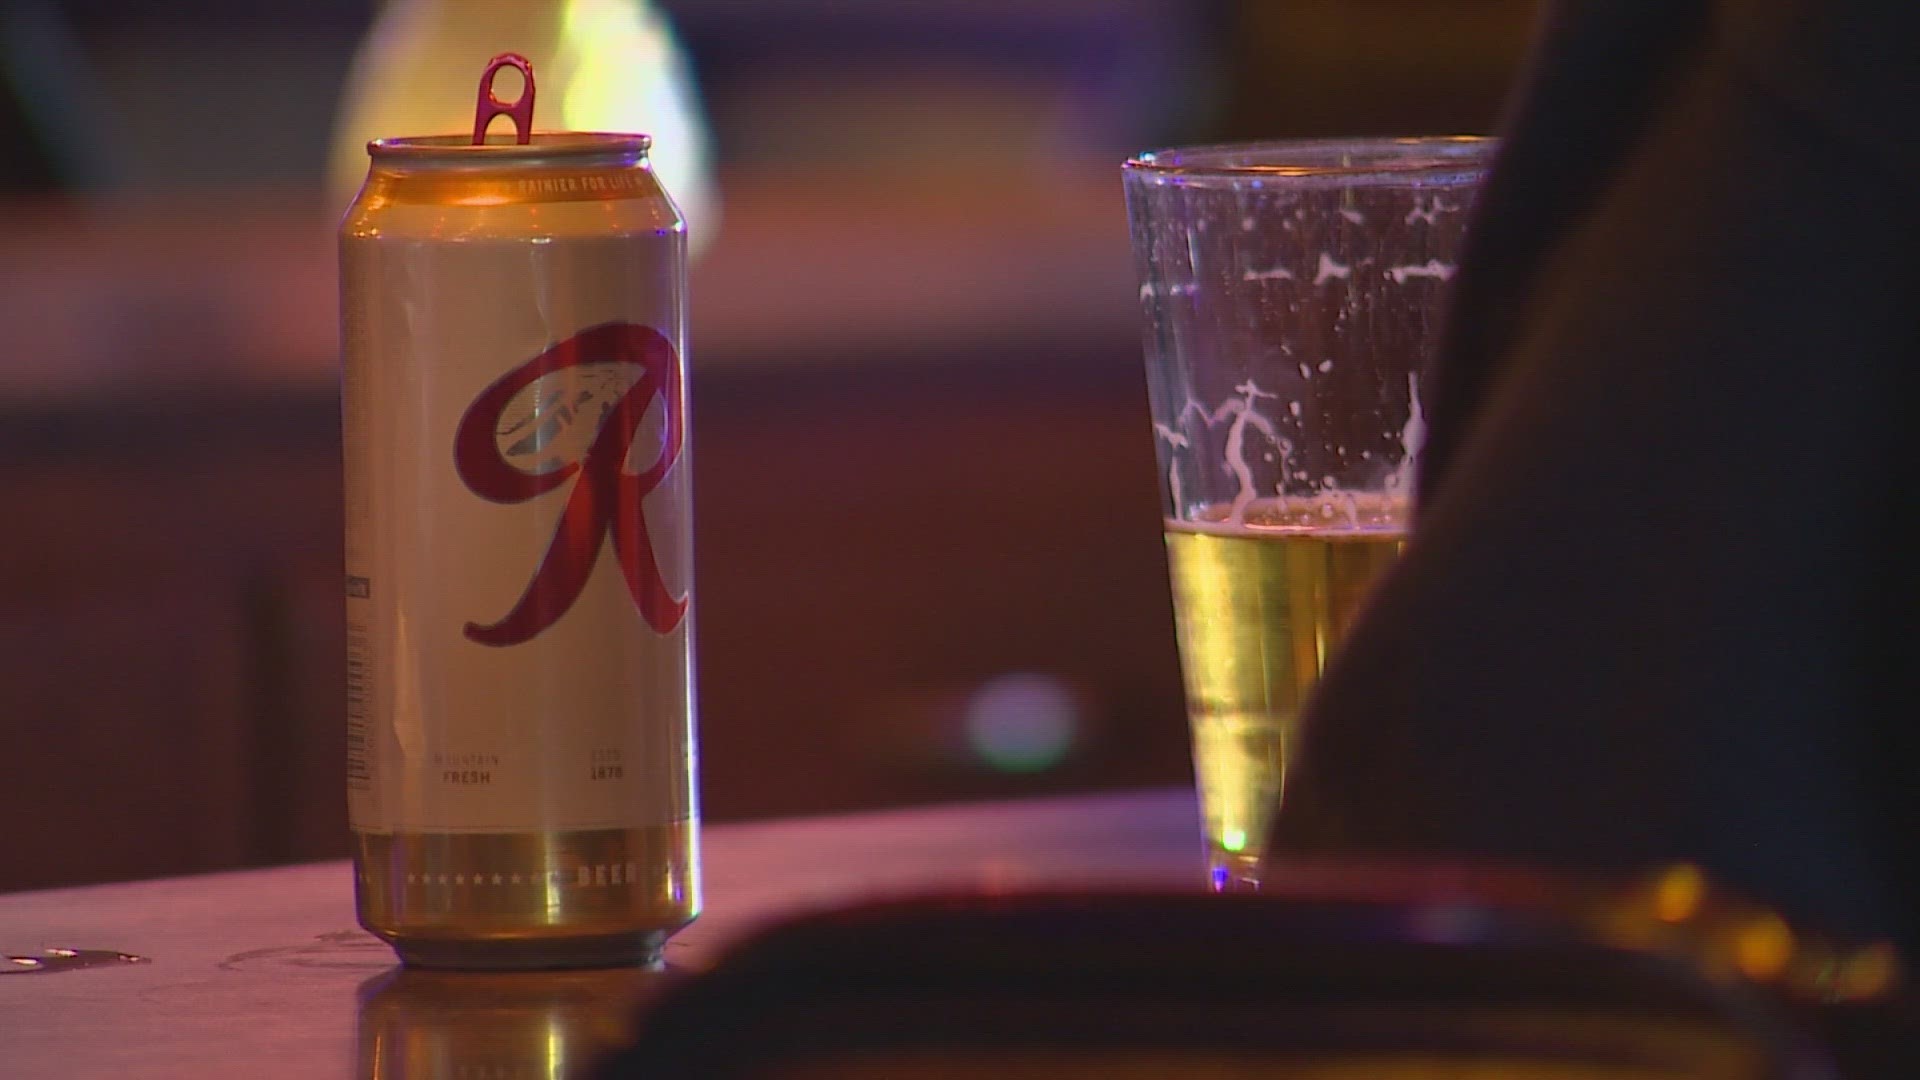 Multiple dive bars and establishments confirm they can't get Rainier beer on draft, but there are still plenty of cans.